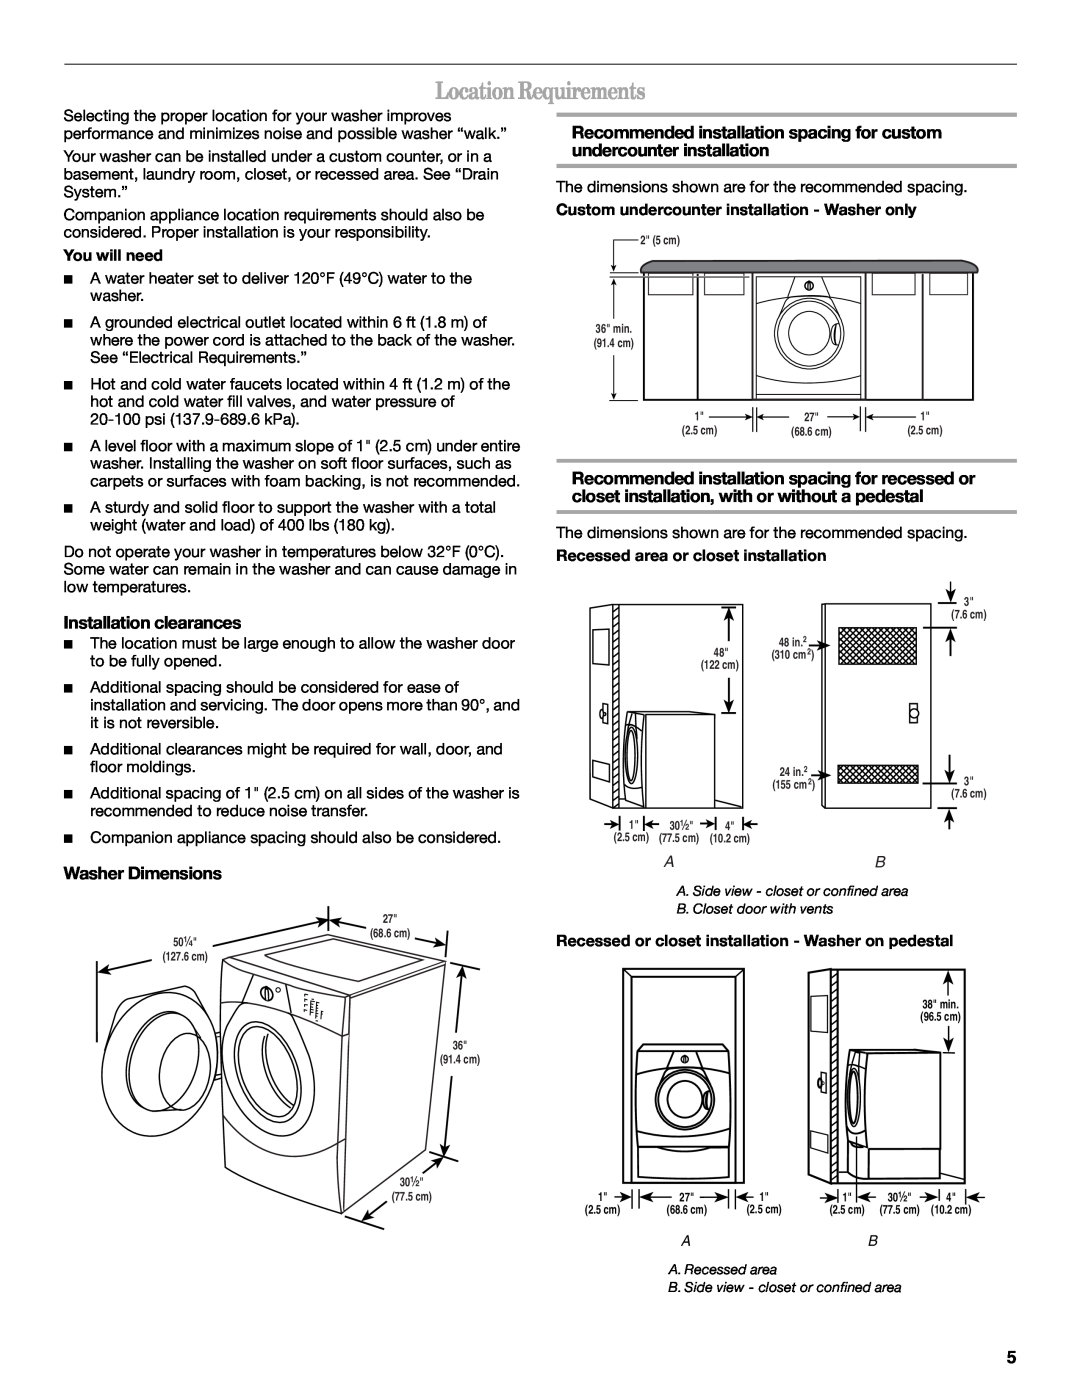 Whirlpool W10117768A manual Location Requirements, Recommended installation spacing for custom undercounter installation 